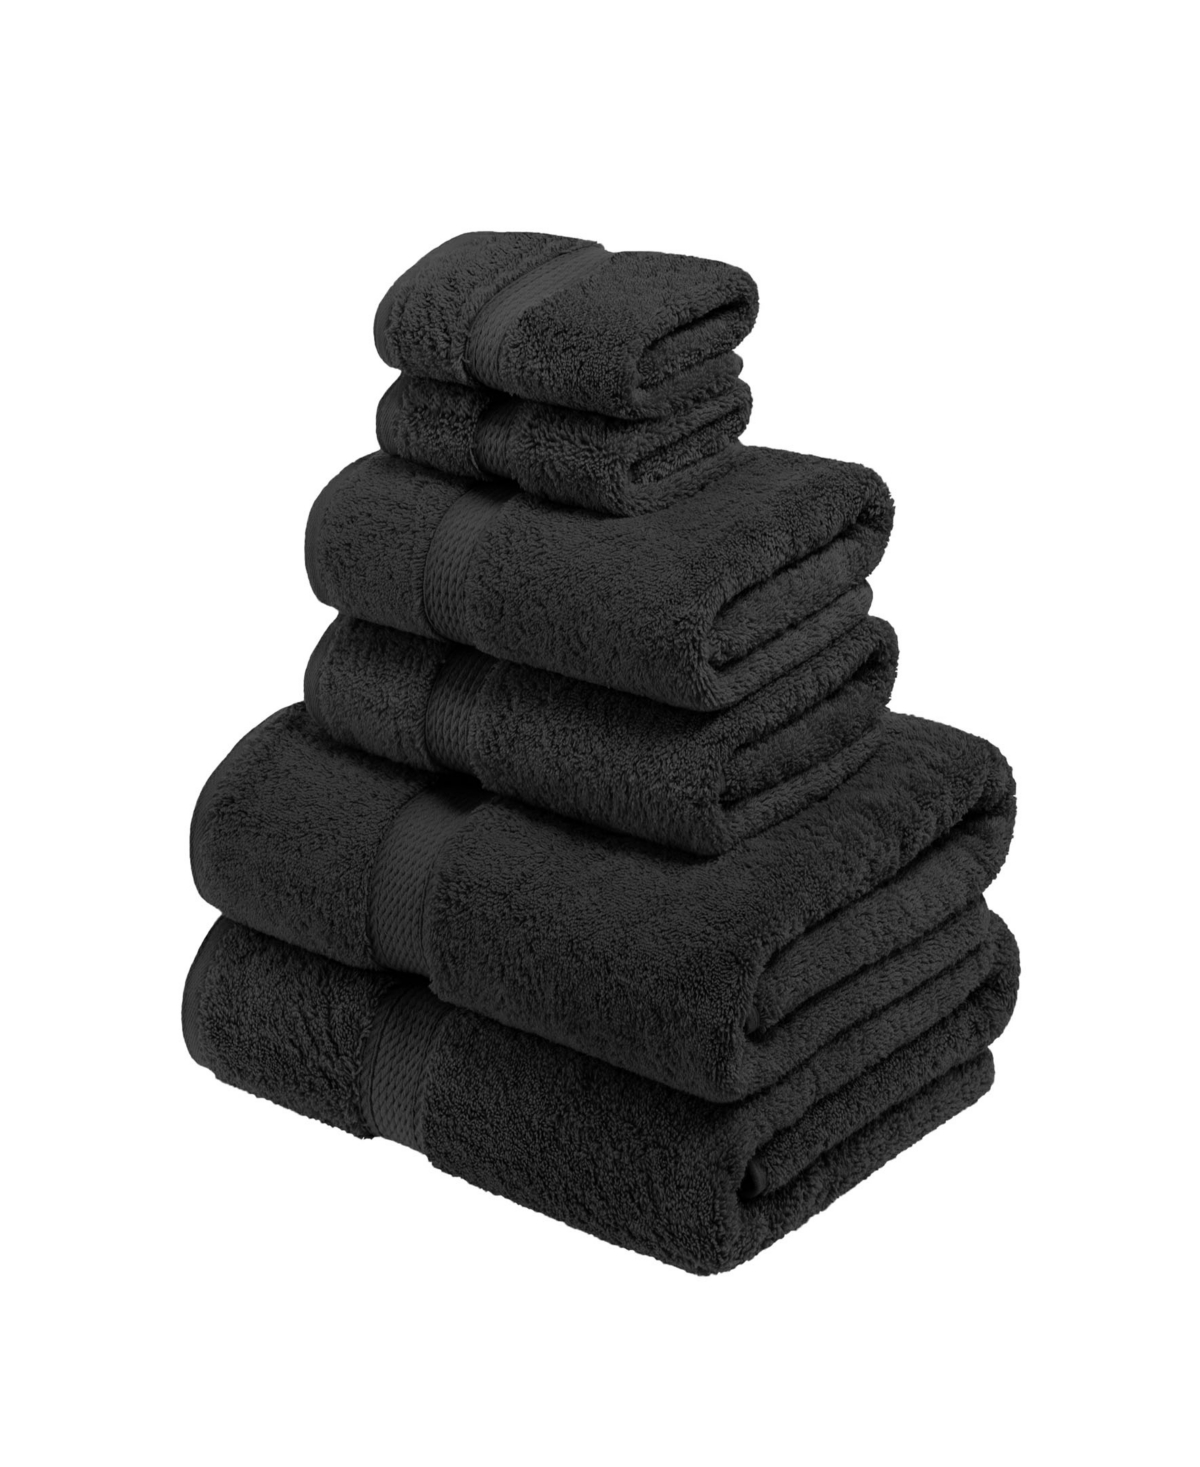 Superior Highly Absorbent 6 Piece Egyptian Cotton Ultra Plush Solid Assorted Bath Towel Set Bedding In Black